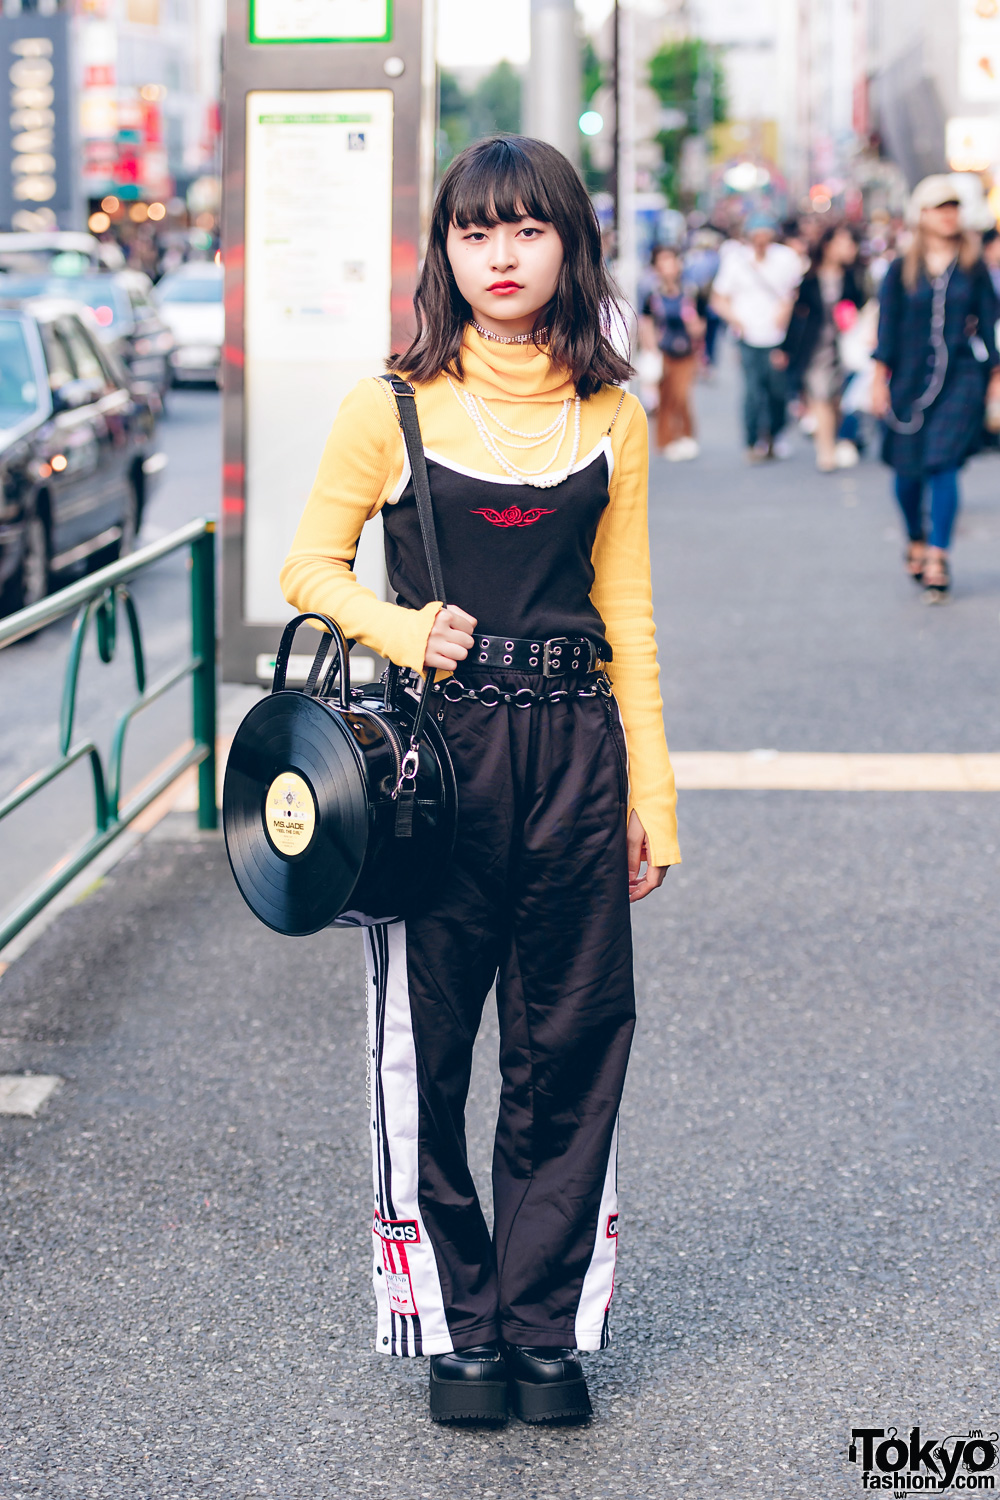 Japanese Student in Faith Tokyo Top, Peco Club Shoes, and G2? Vinyl Record Bag